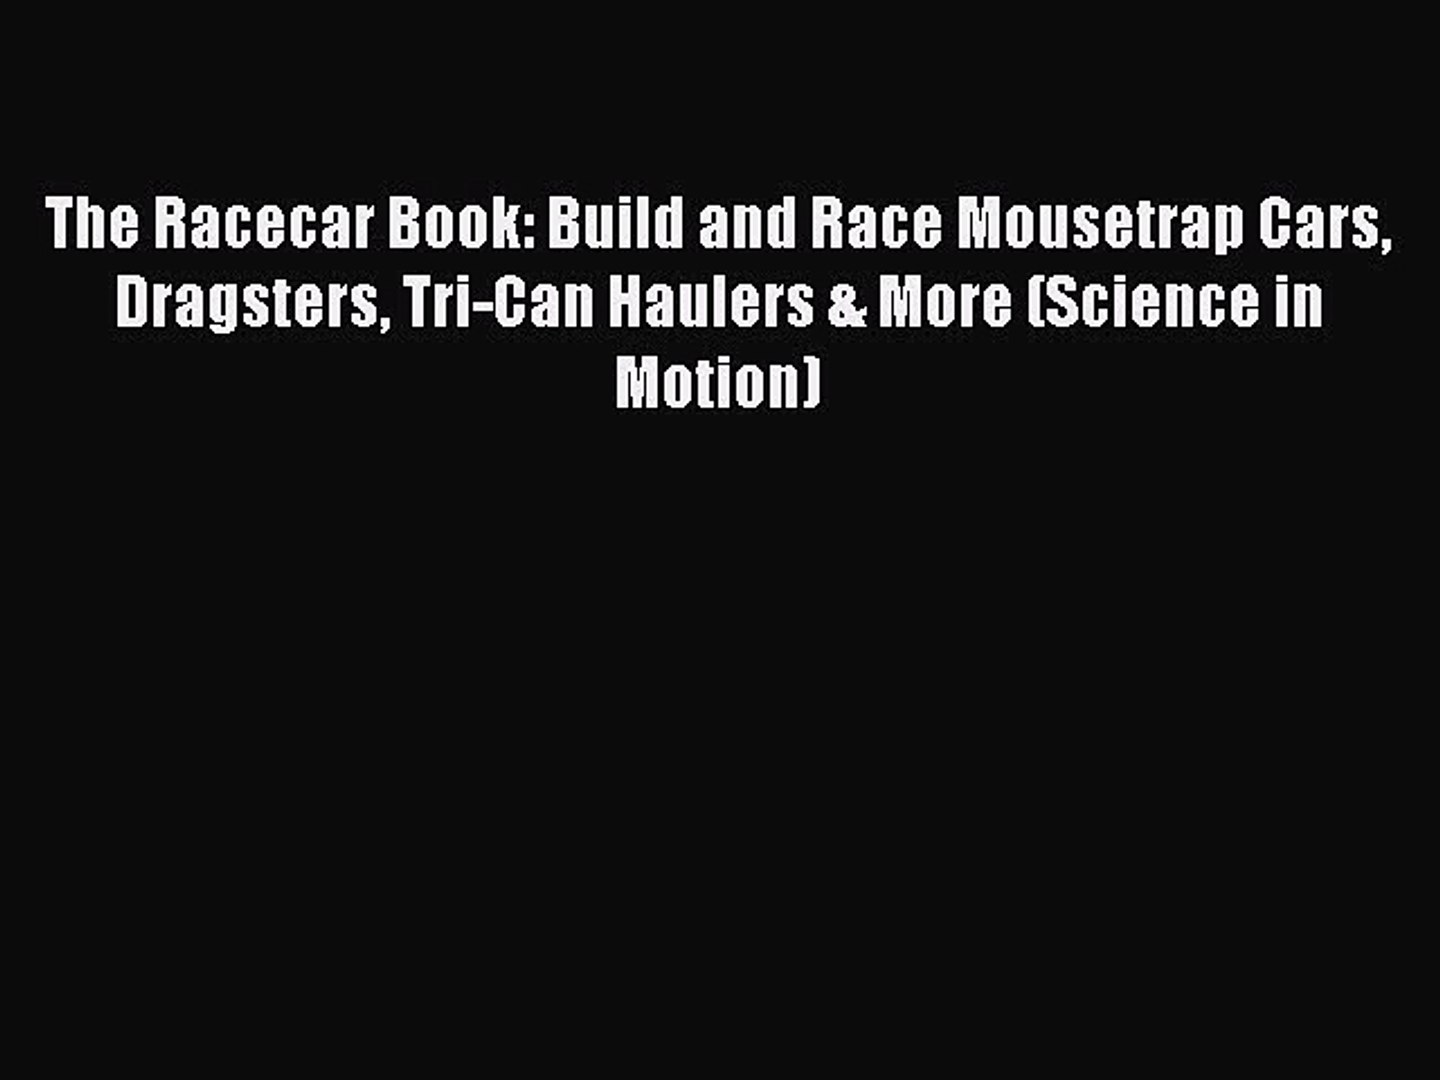 Tri-Can Haulers /& More Dragsters The Racecar Book Build and Race Mousetrap Cars